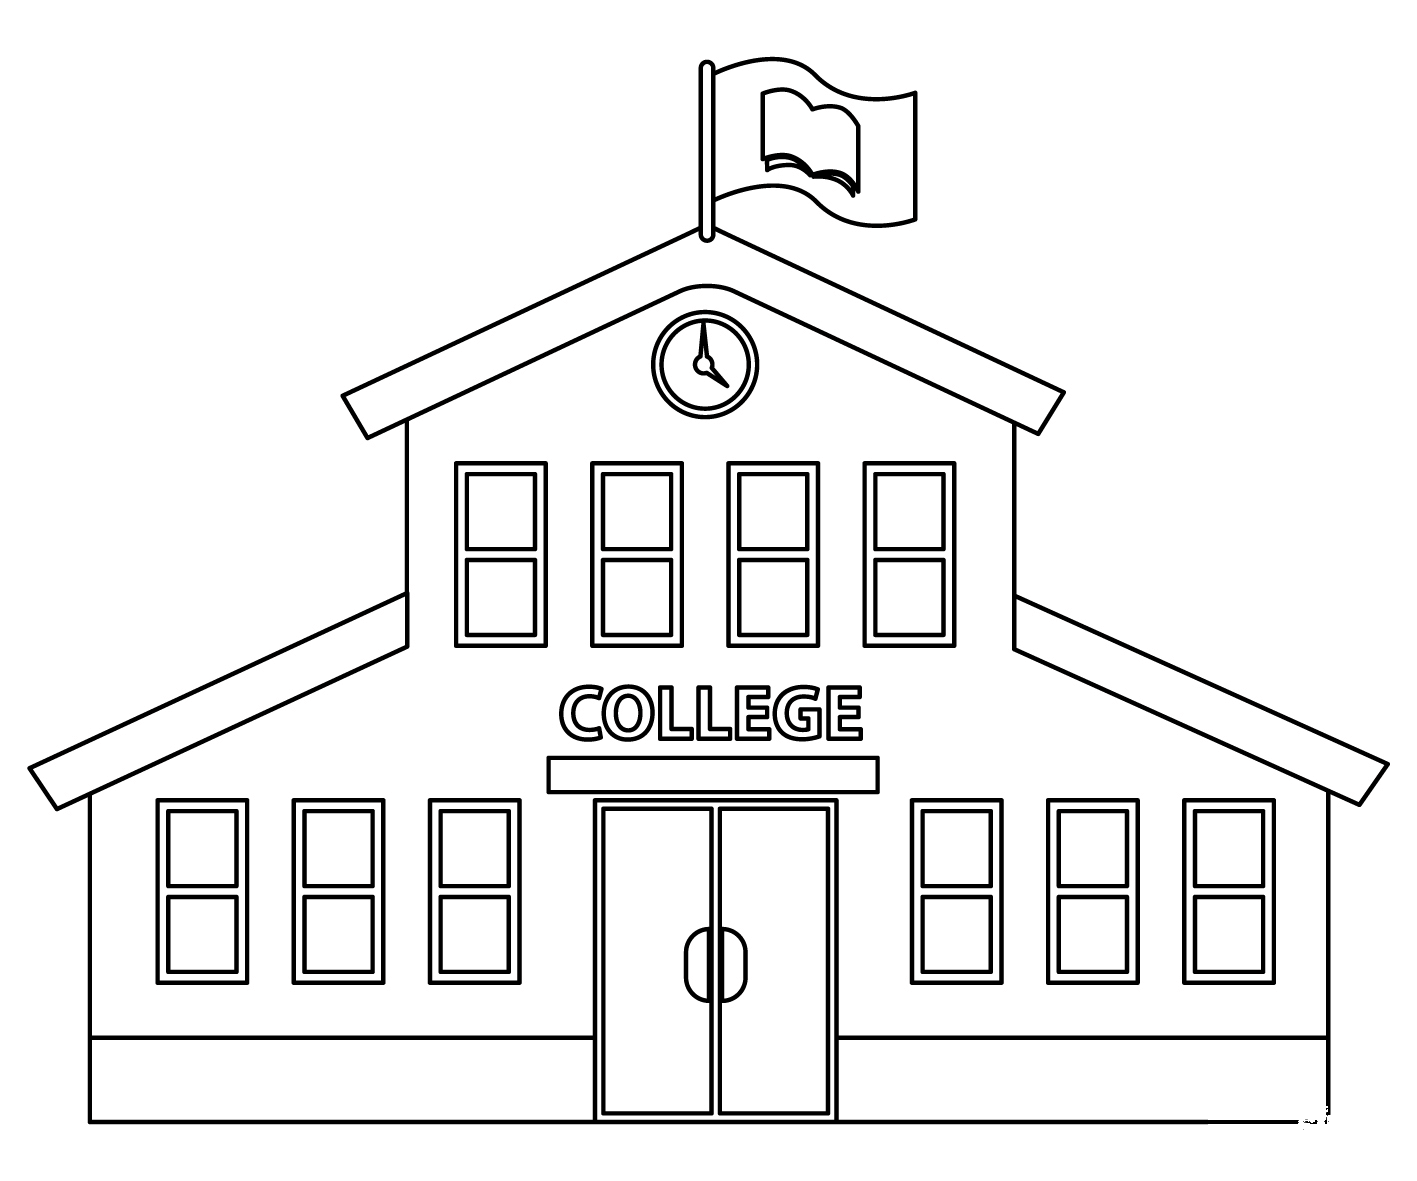 College Building coloring page - ColouringPages